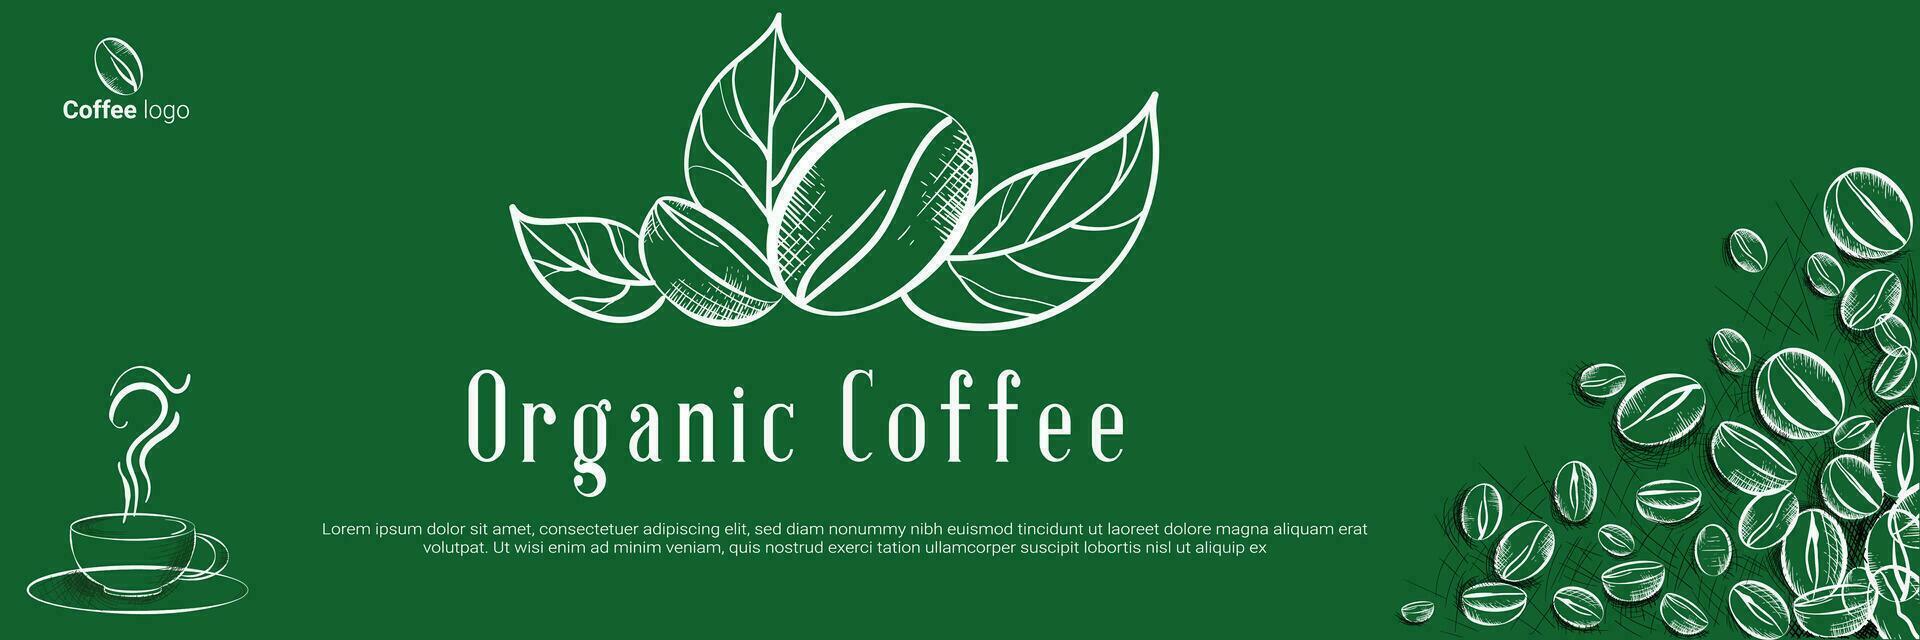 Banner organic coffee Design, template design for coffee roaster concept, bakery banner for eco store and market, flower panoramic background with vector coffee beans illustration in engraving style.